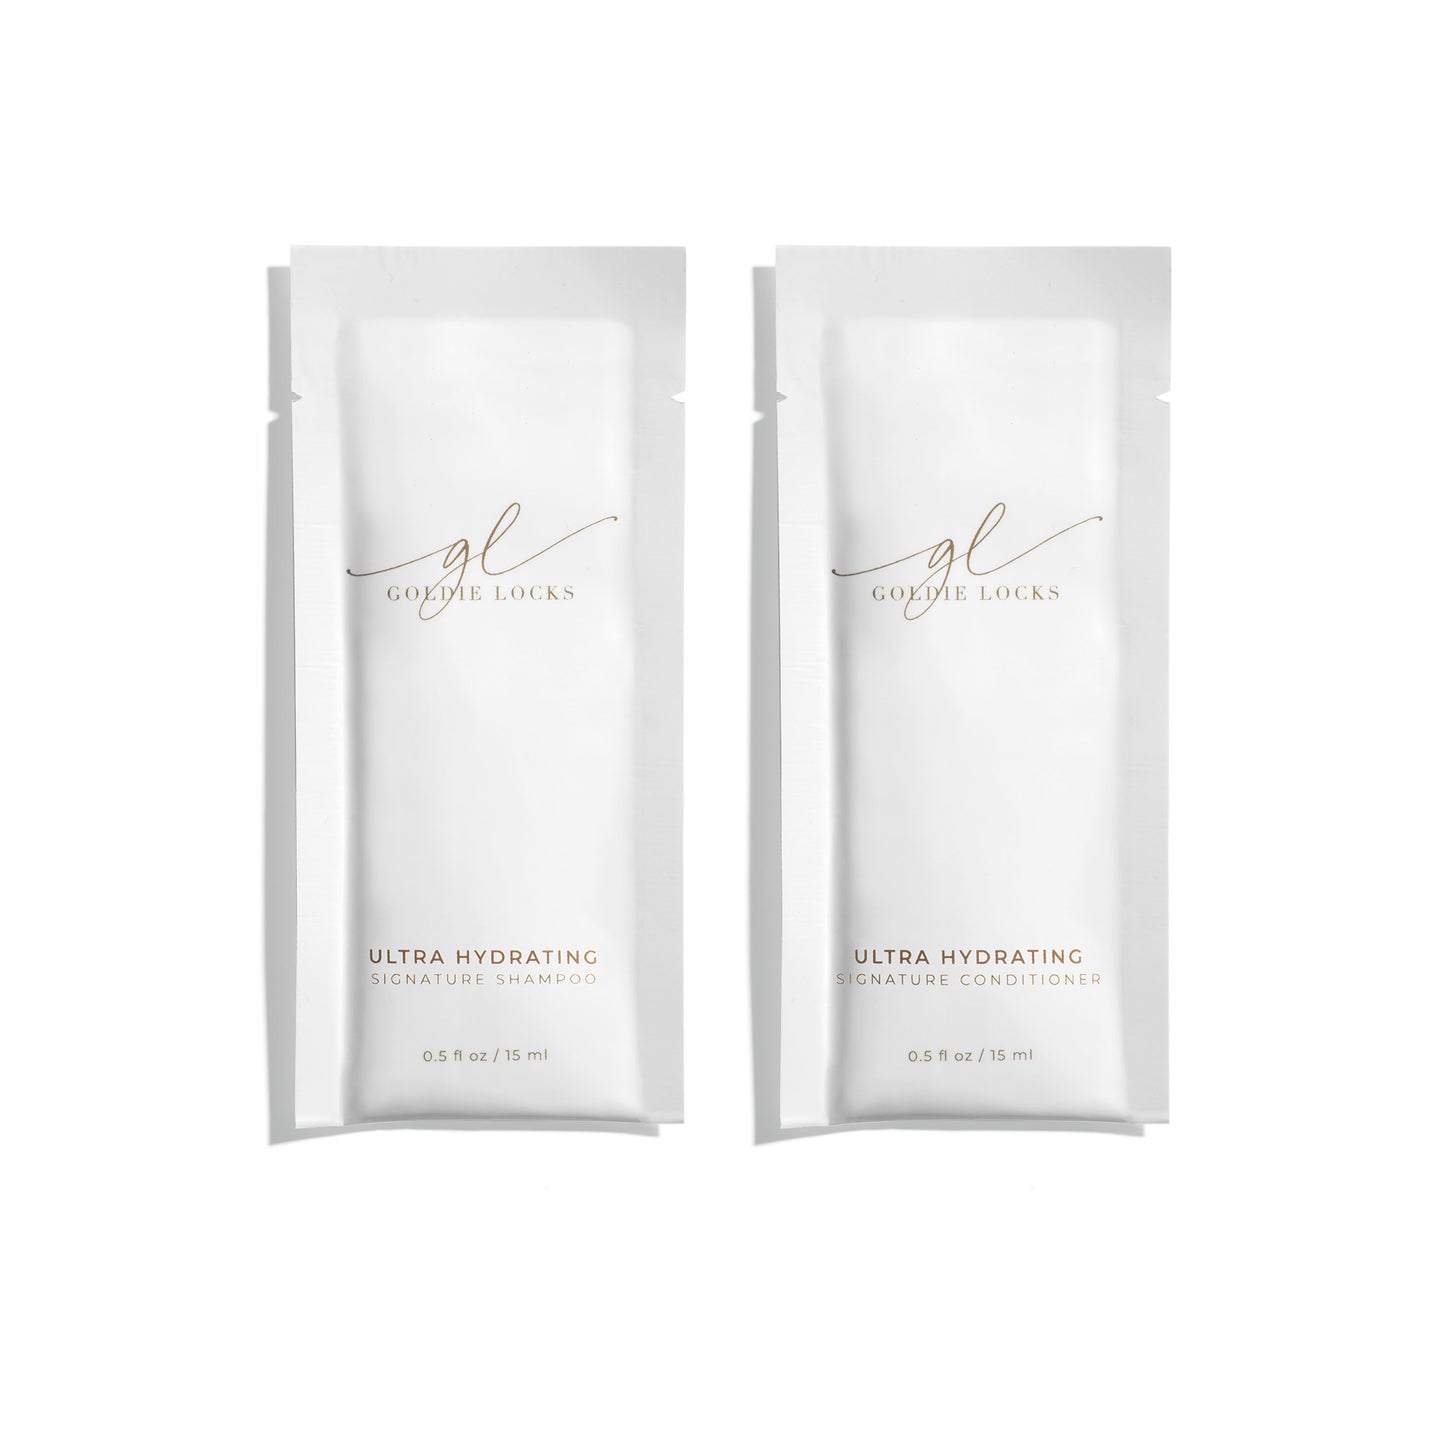 Ultra Hydrating Signature Shampoo & Conditioner 15 ml Sample (20 Pack)